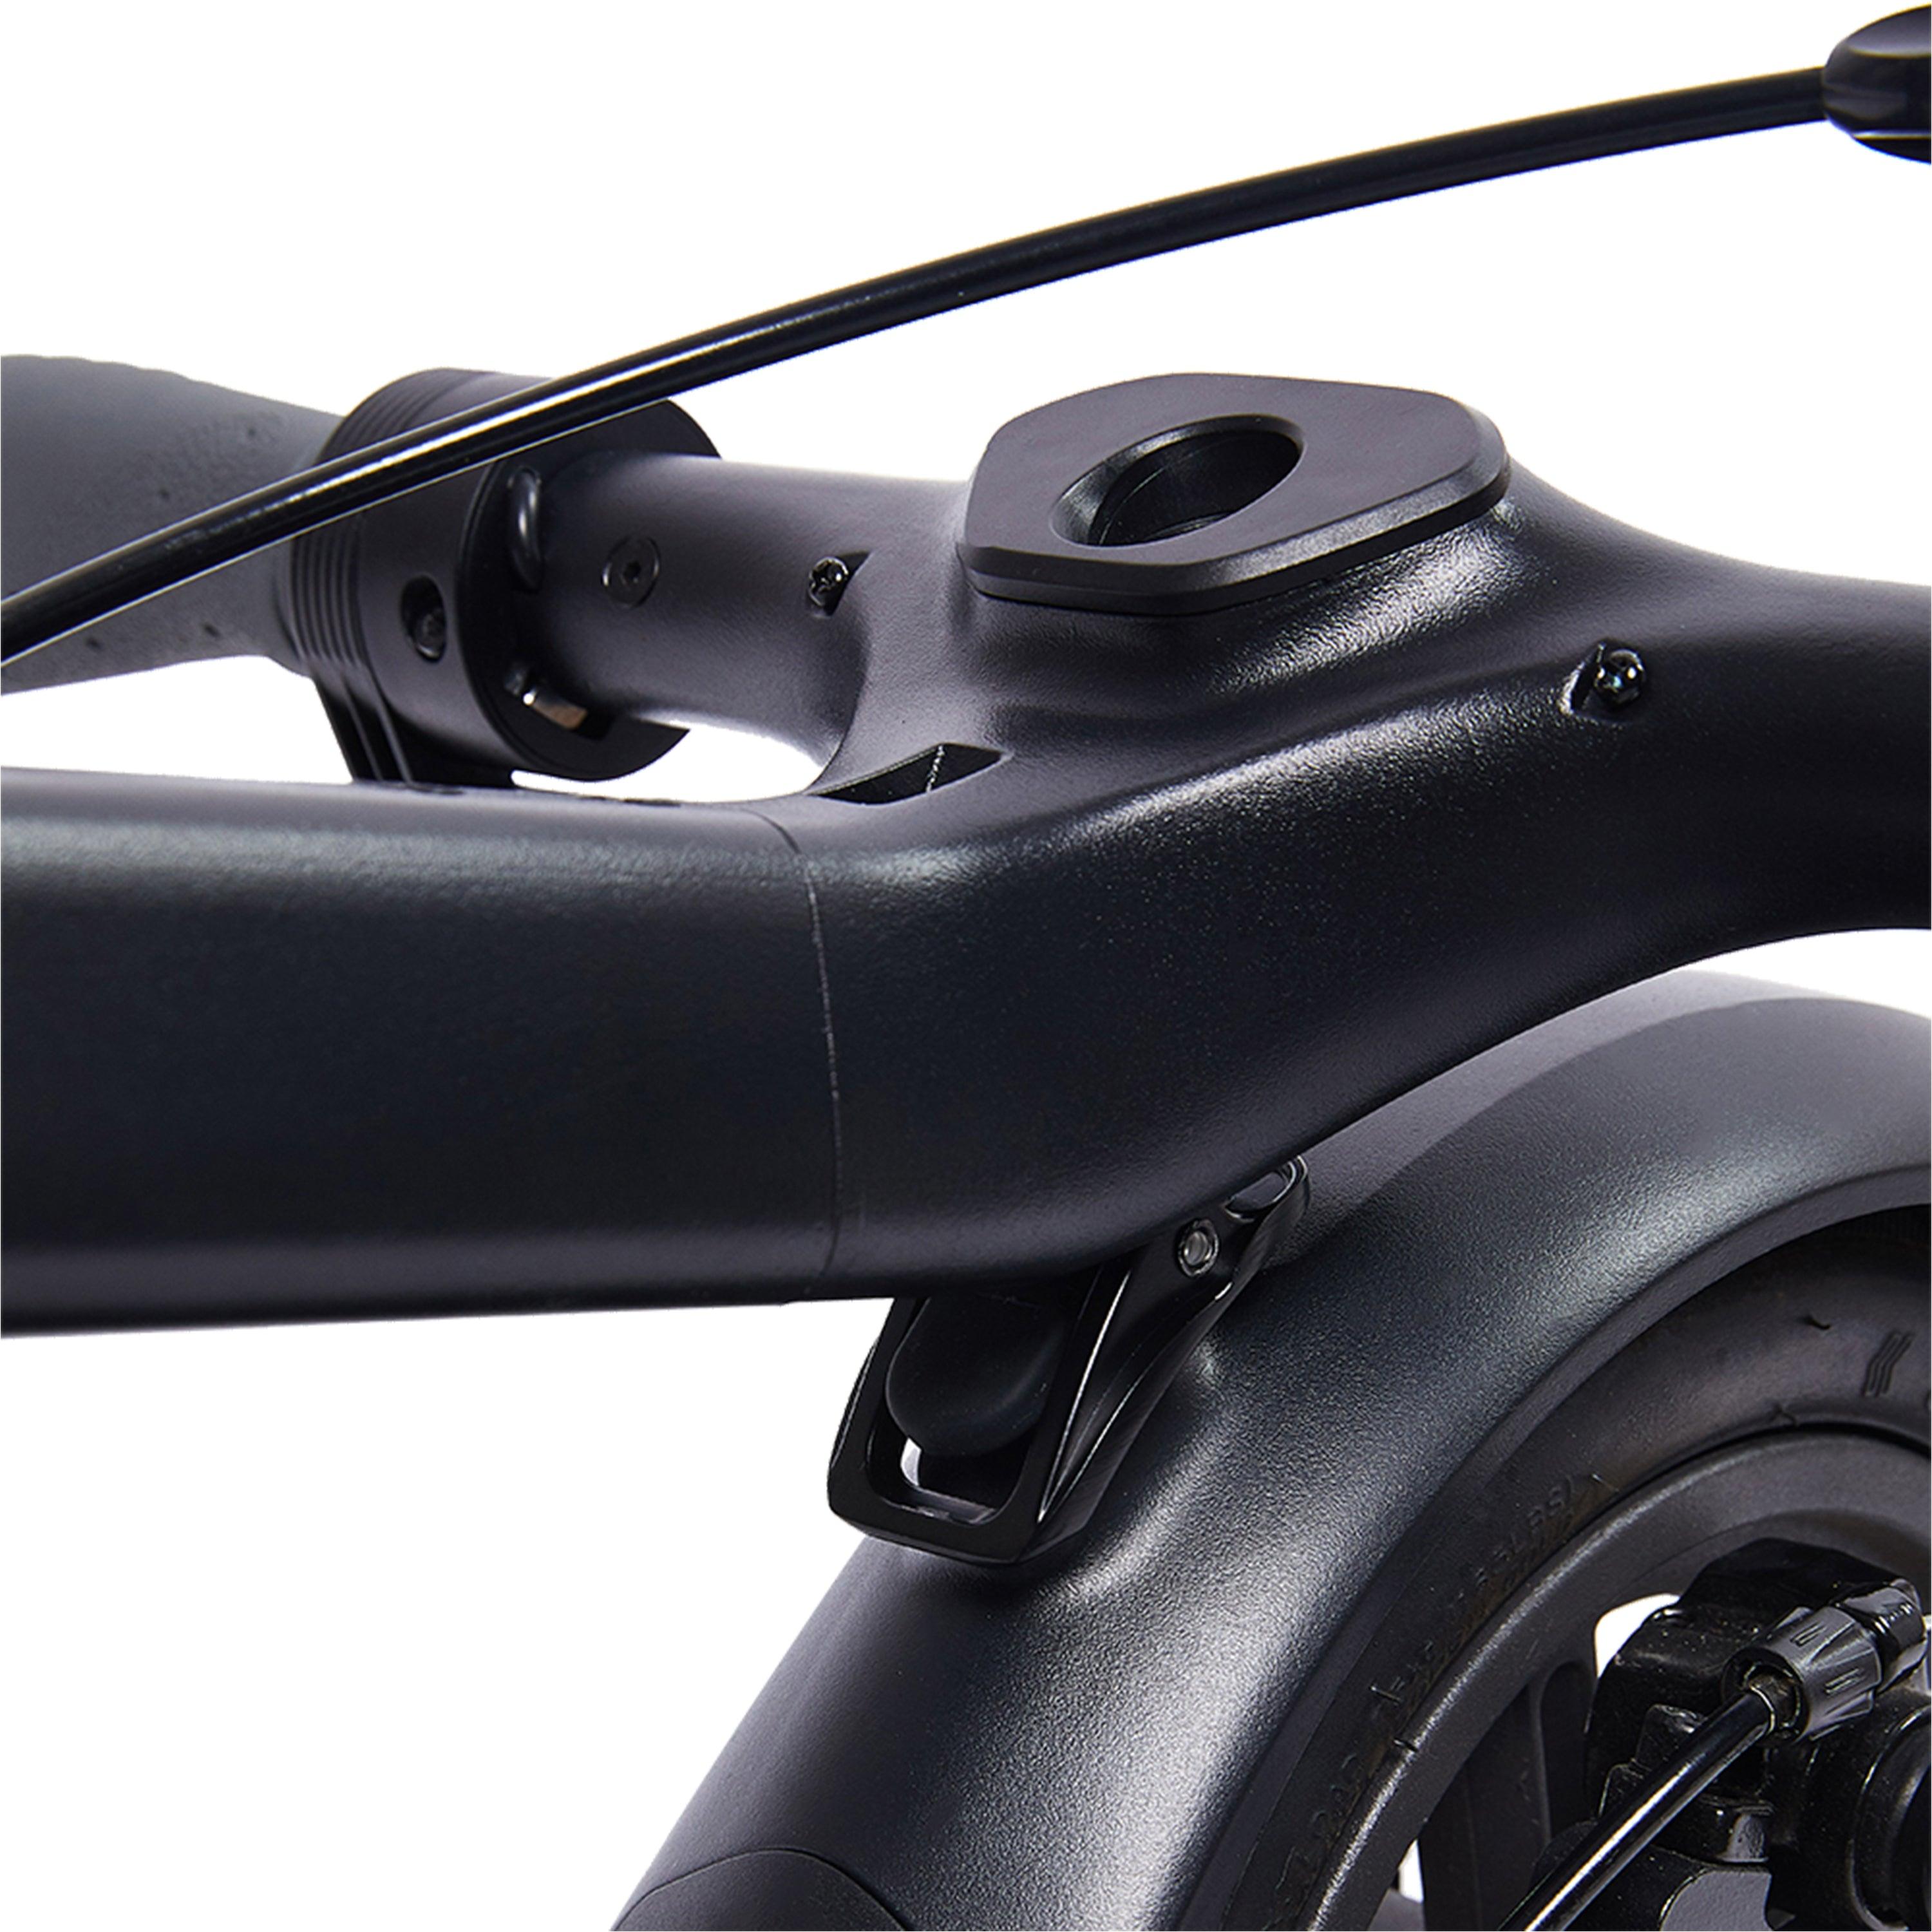 36V Freddo X1 E-Scooter. 350W motor, 16 mph, 8.5 inch tires, lightweight and foldable - DTI Direct USA